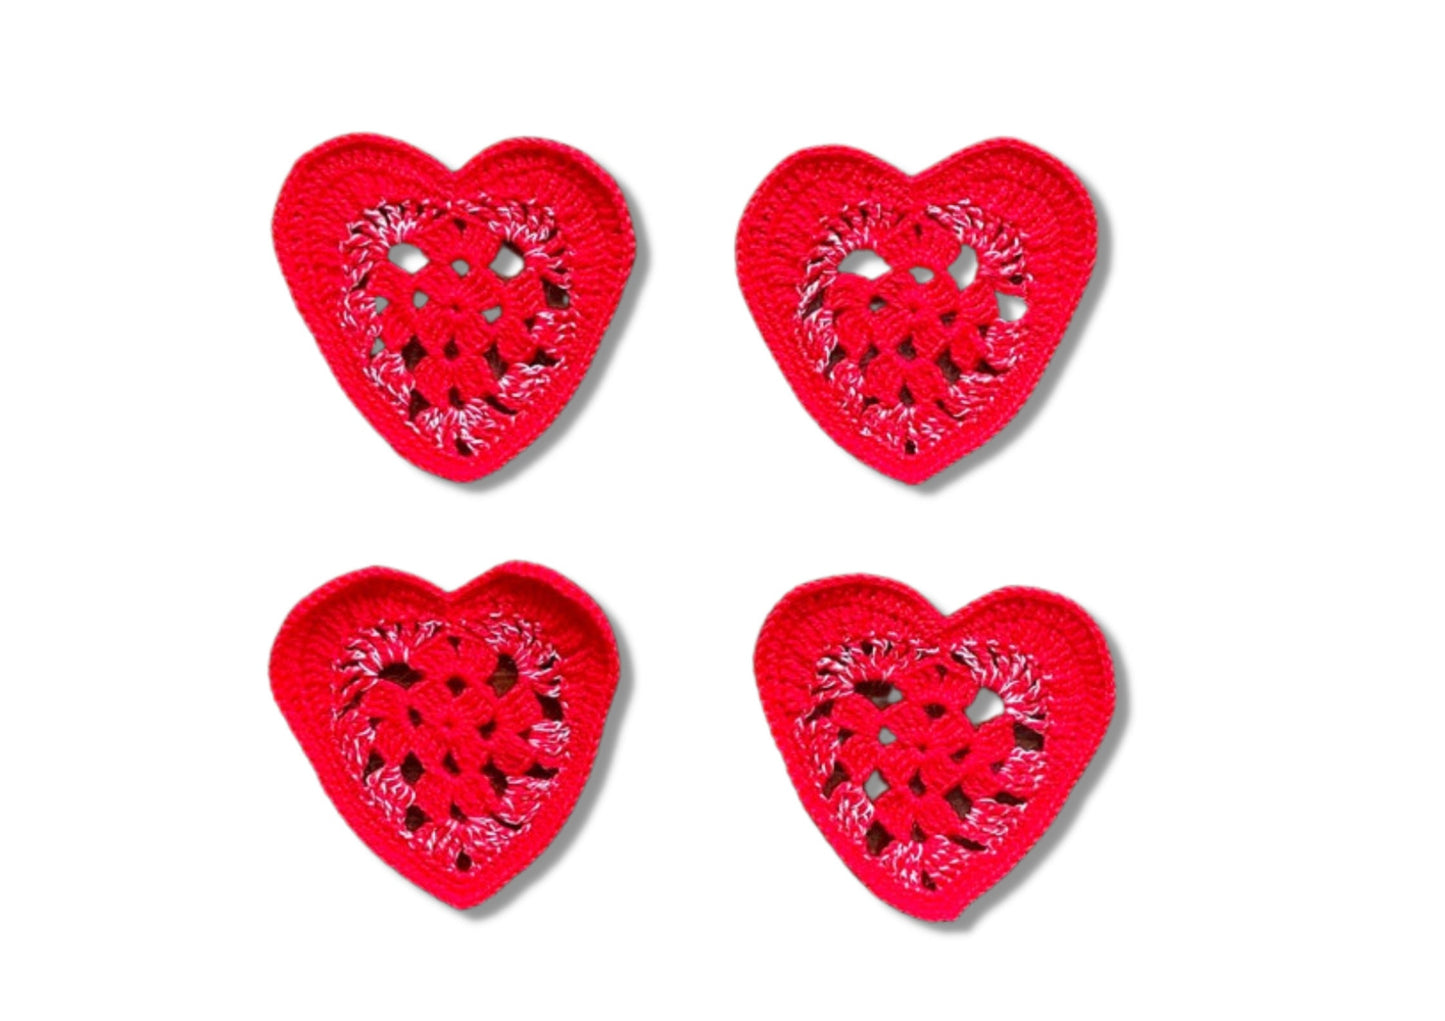 Crochet Red Heart Coasters, Set of 4